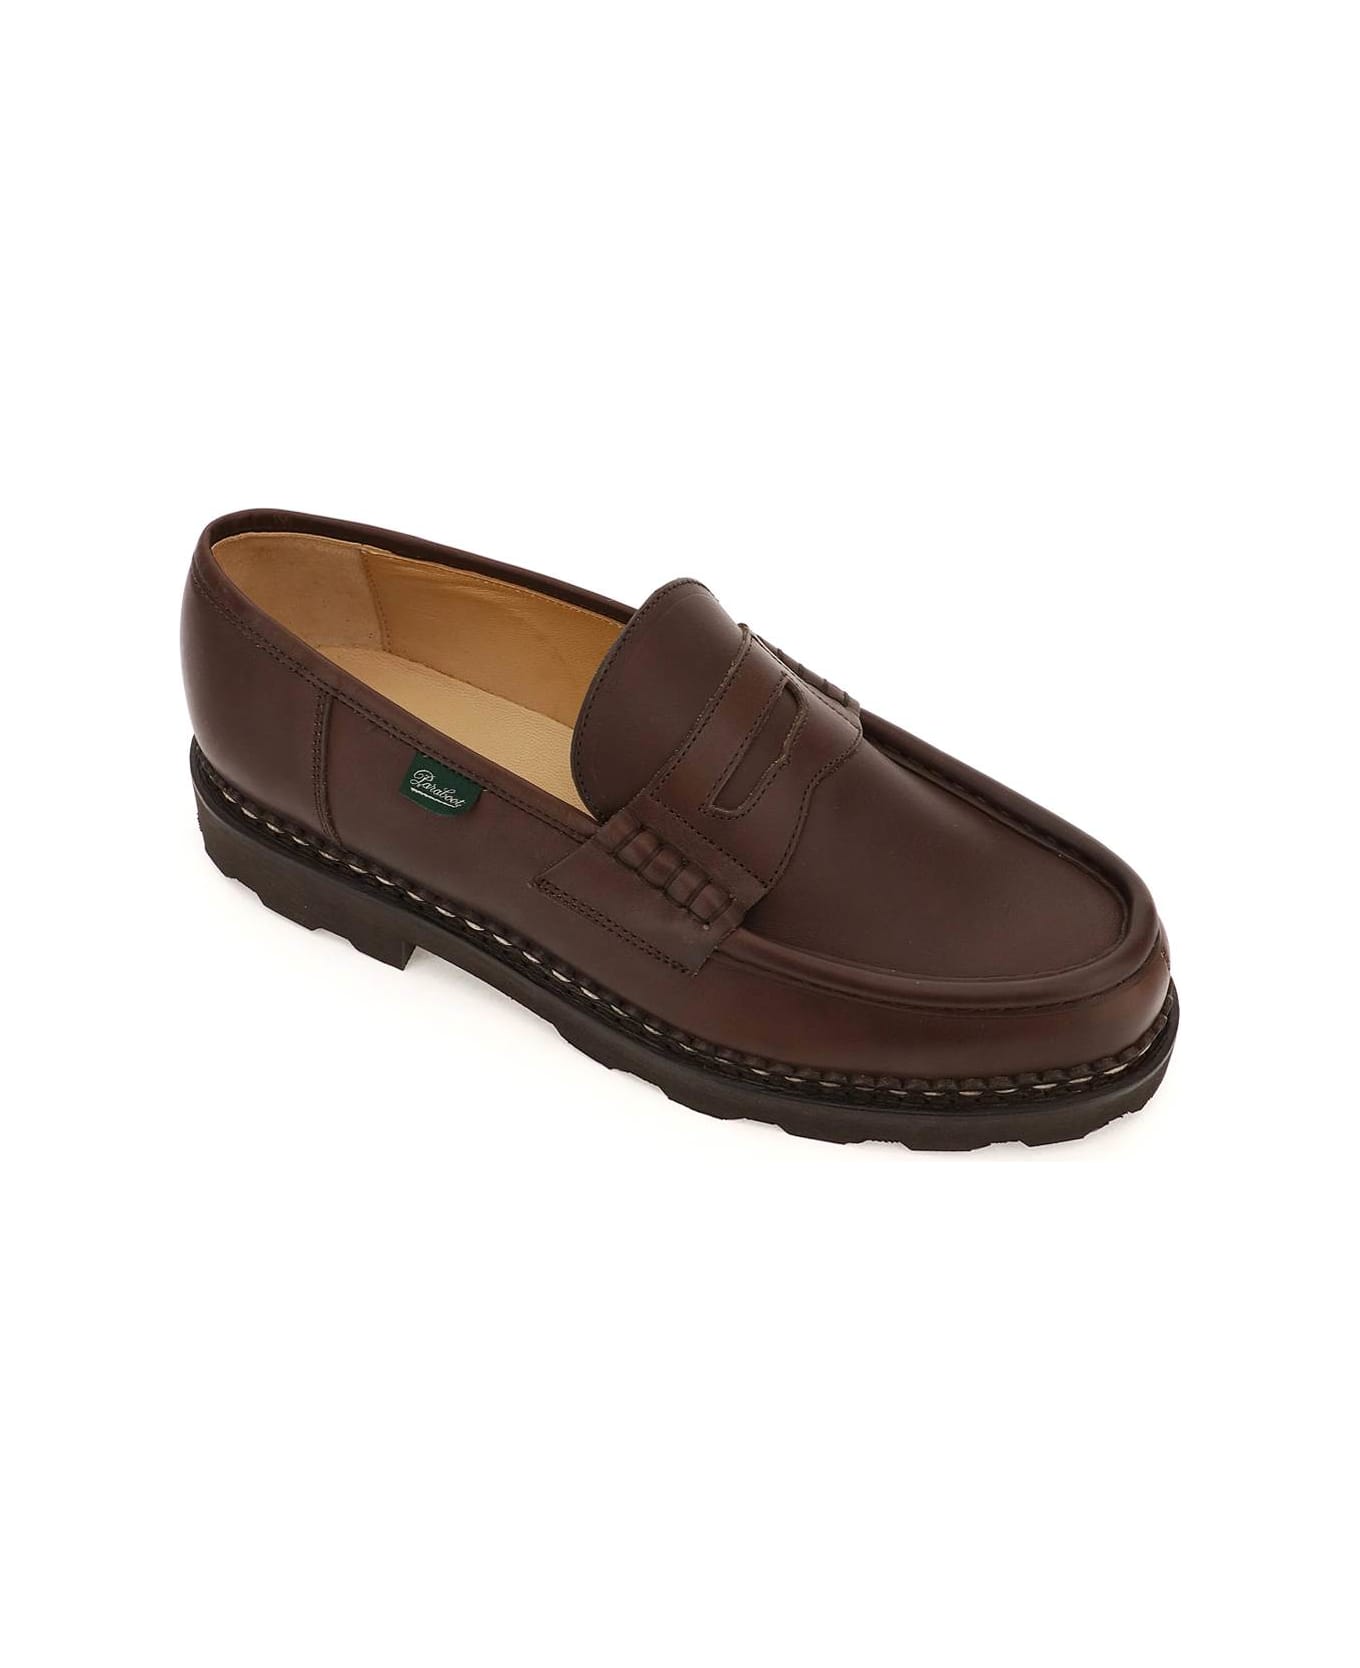 Paraboot Leather Reims Penny Loafers - Marron Lis Cafe`